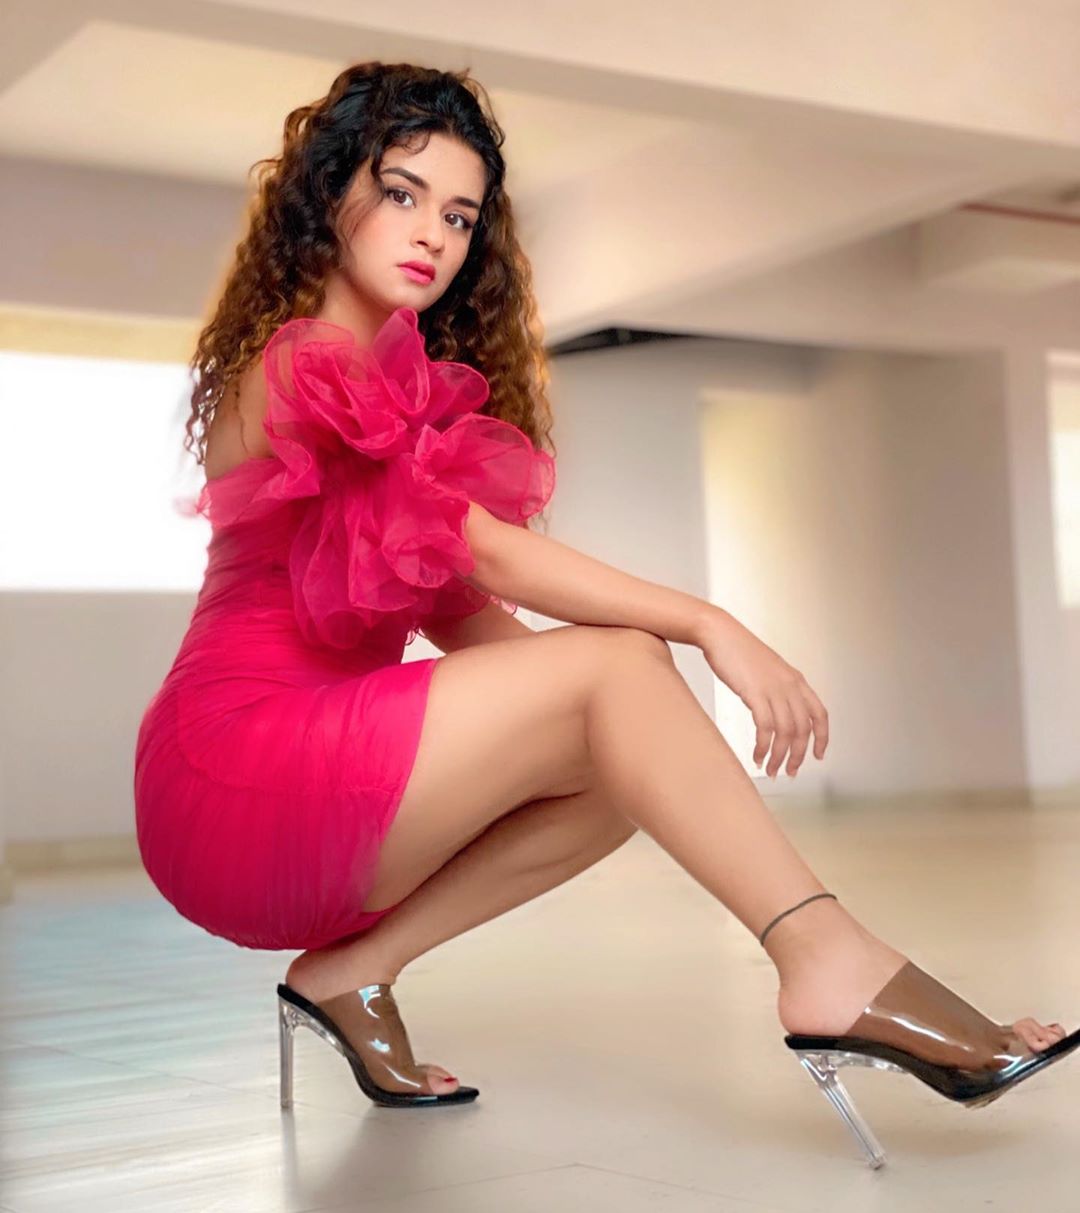 Avneet Kaur These Stunning Pictures Of The Teen Sensation Are Unmissable